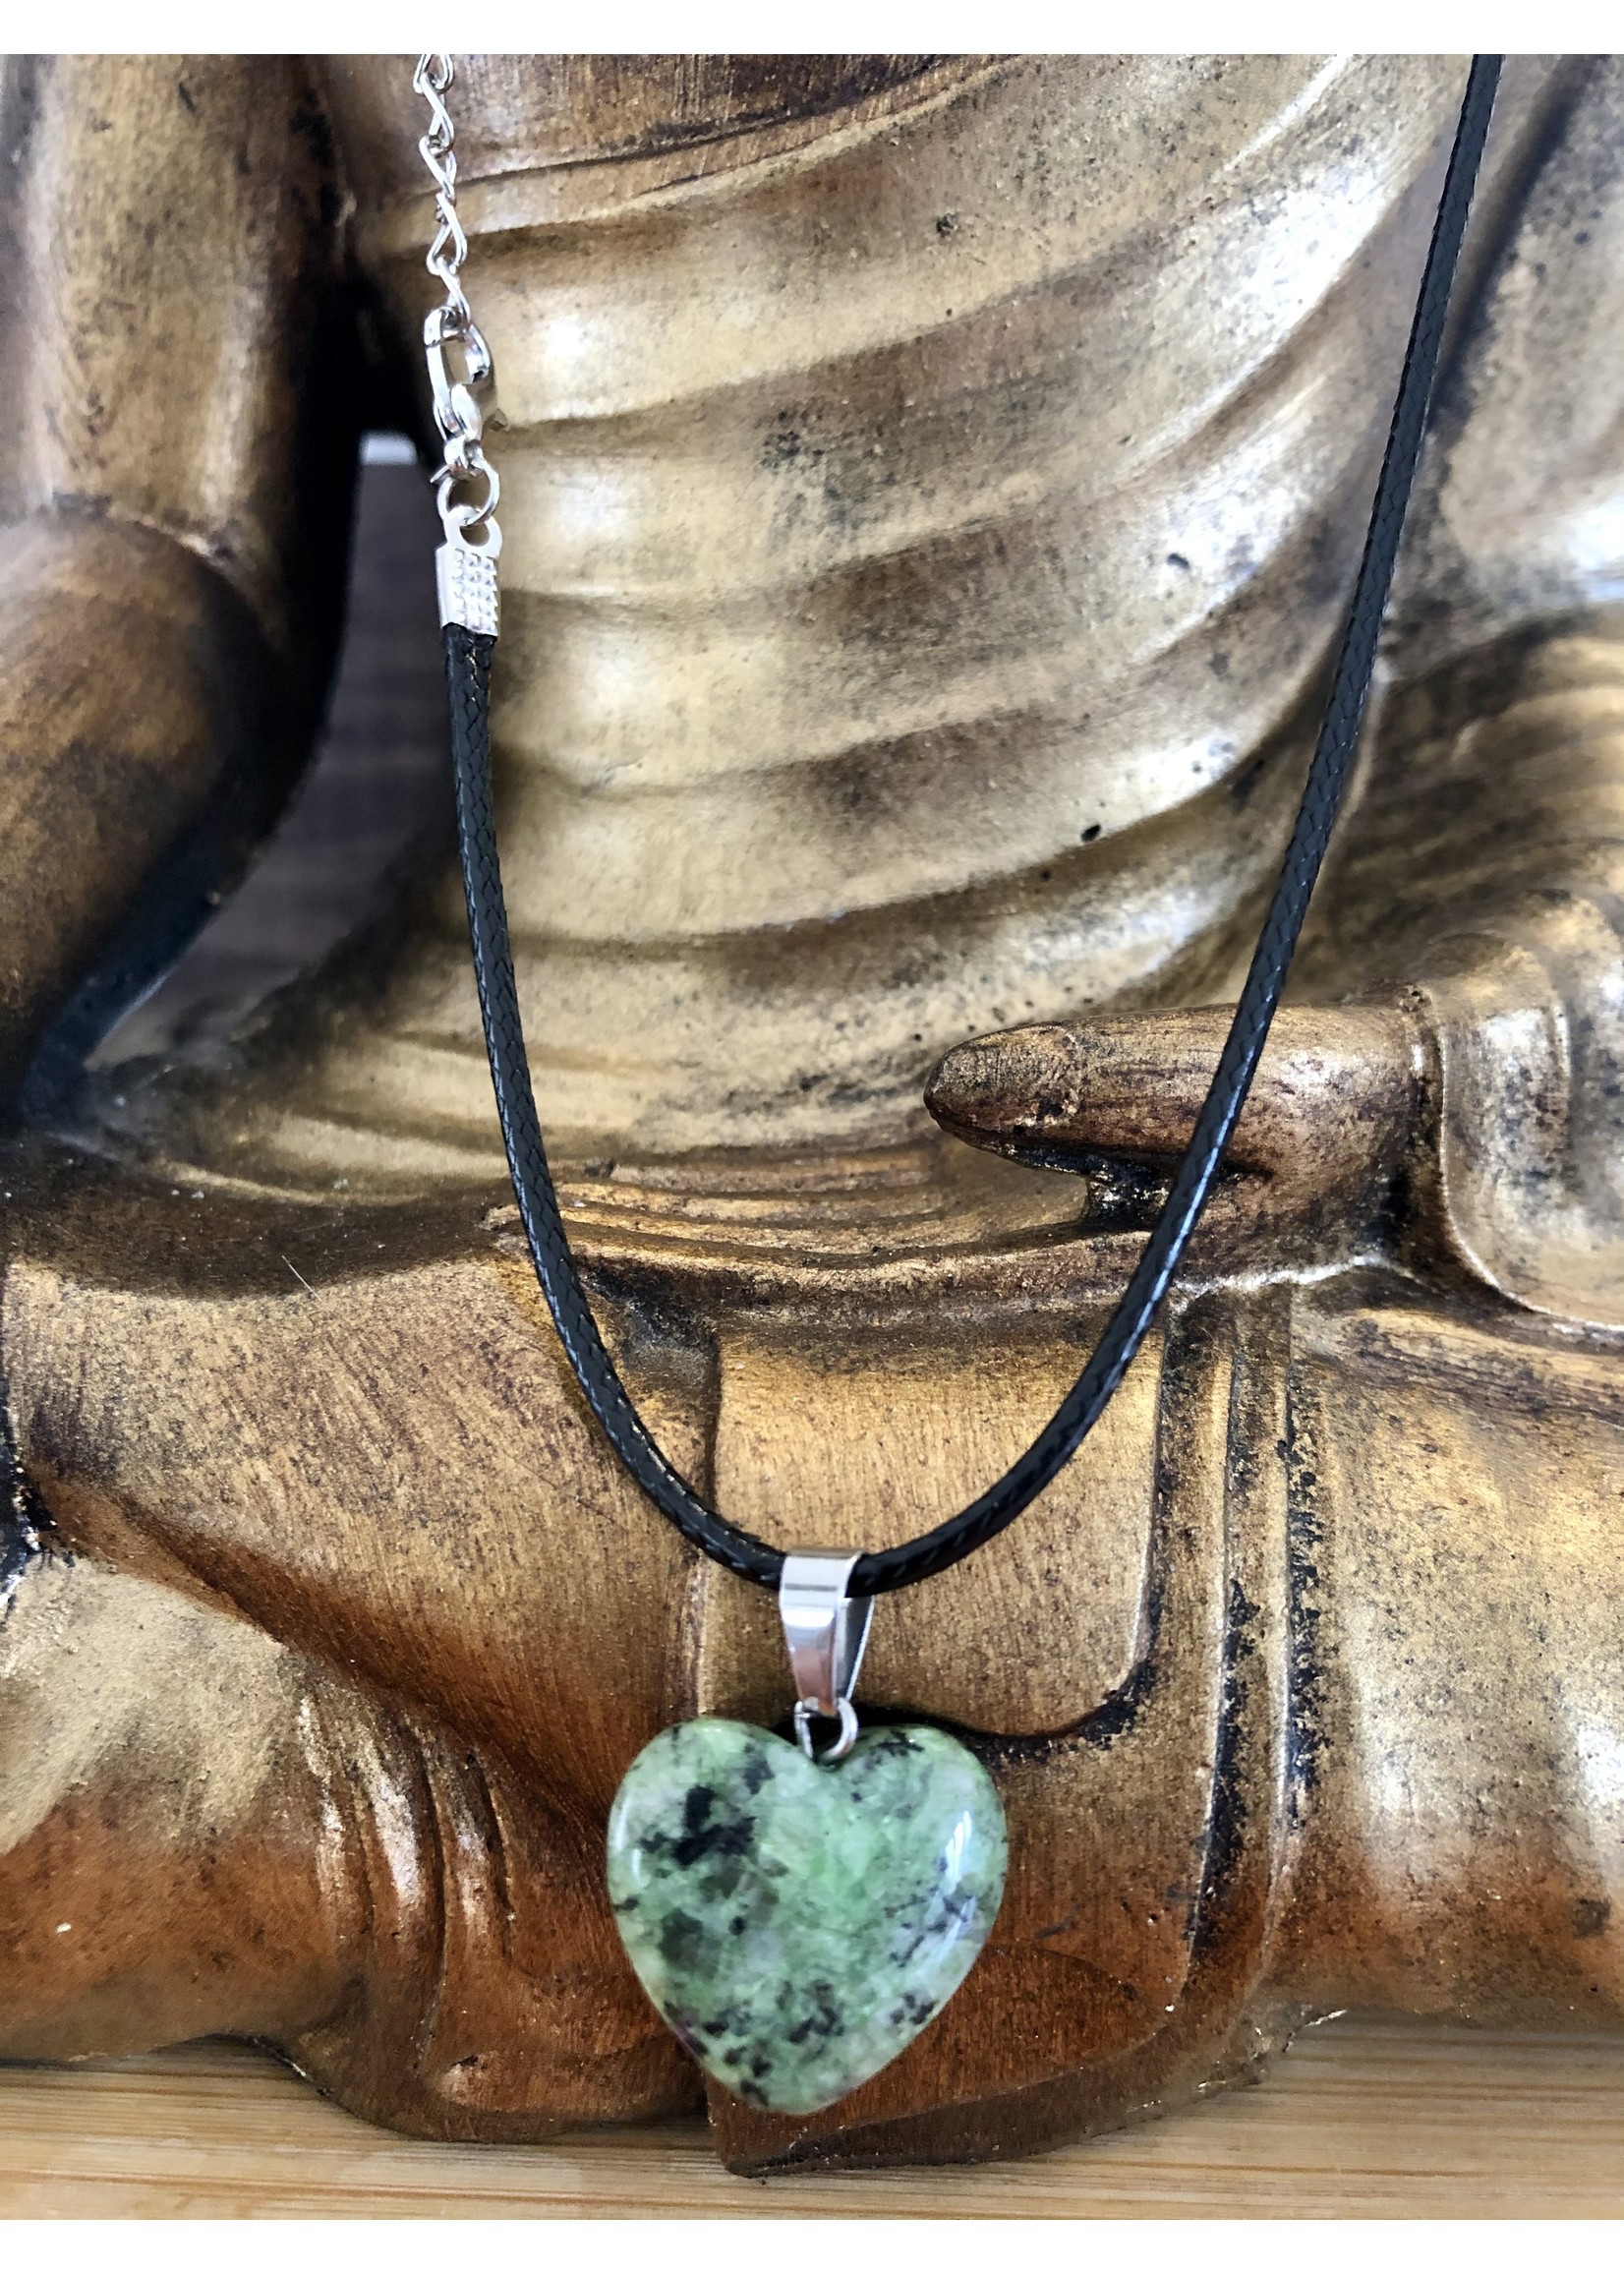 heart necklace rubis zoisite